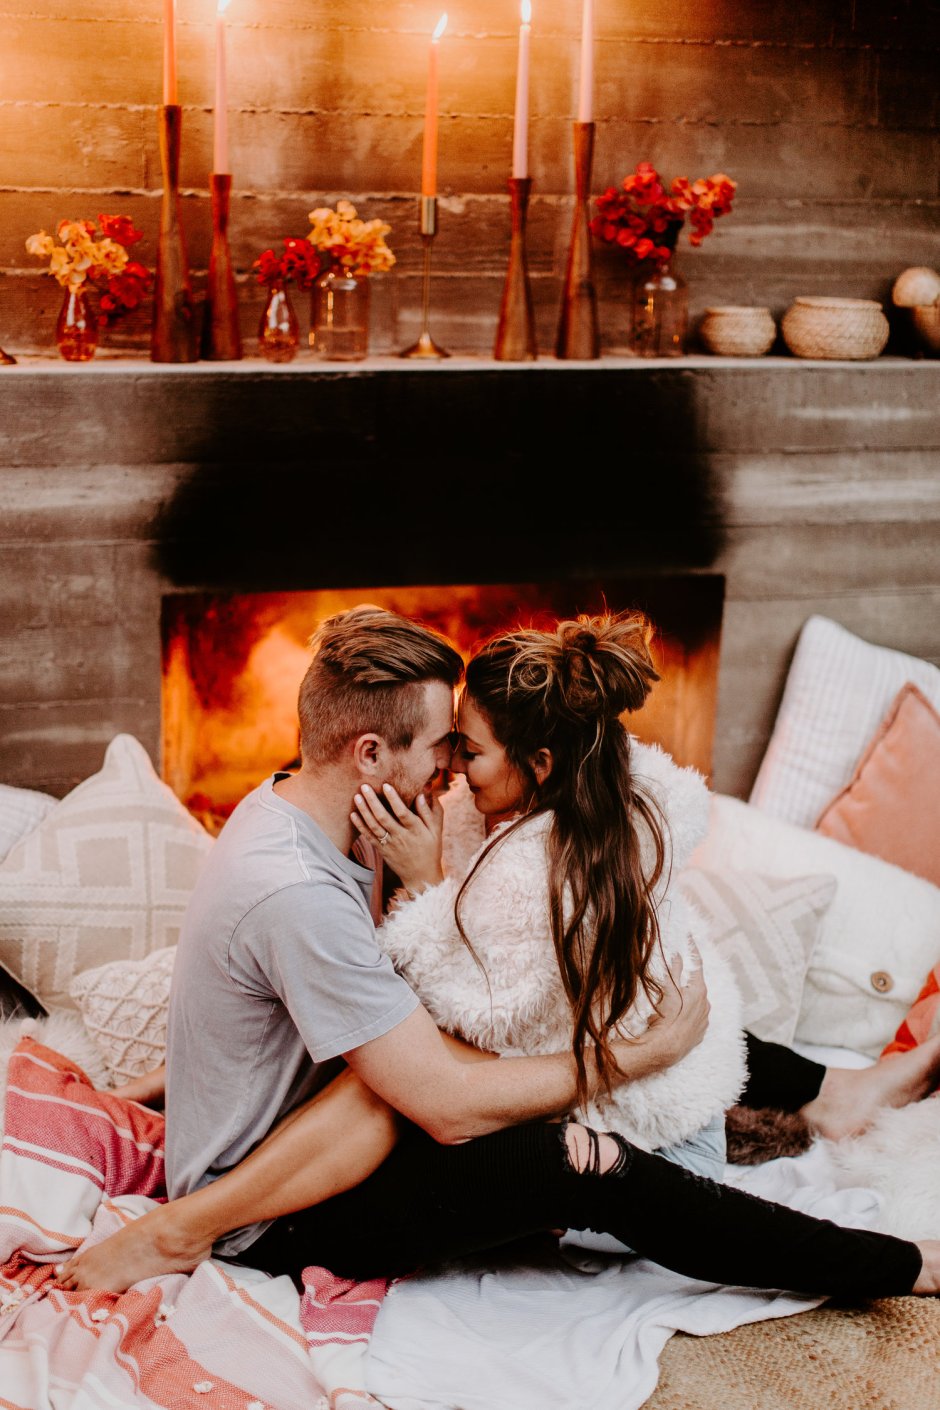 Kissing couple in Fireplace